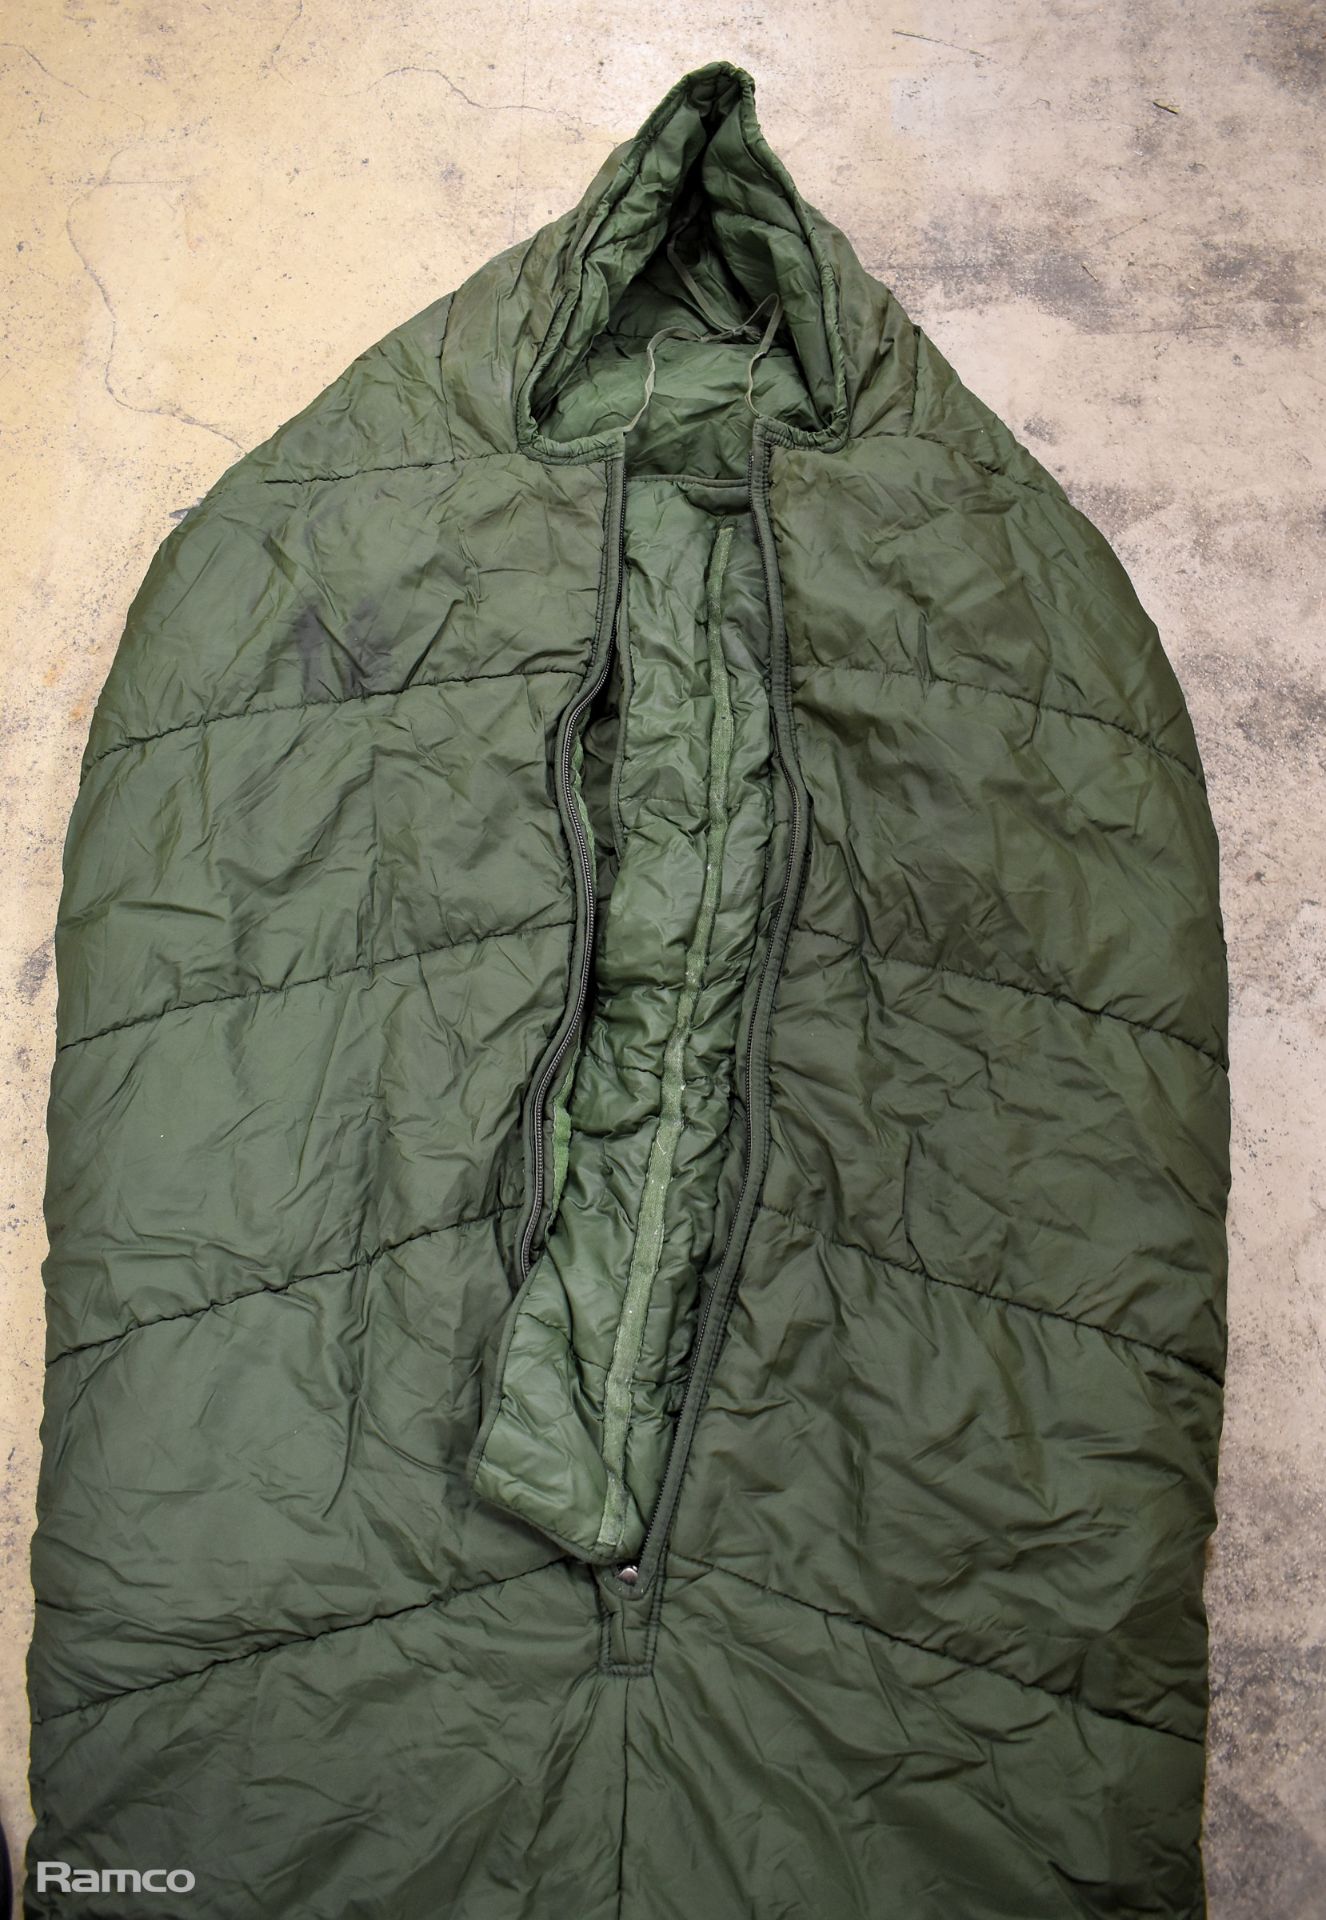 30x Sleeping bags - mixed grades and sizes - Image 6 of 8